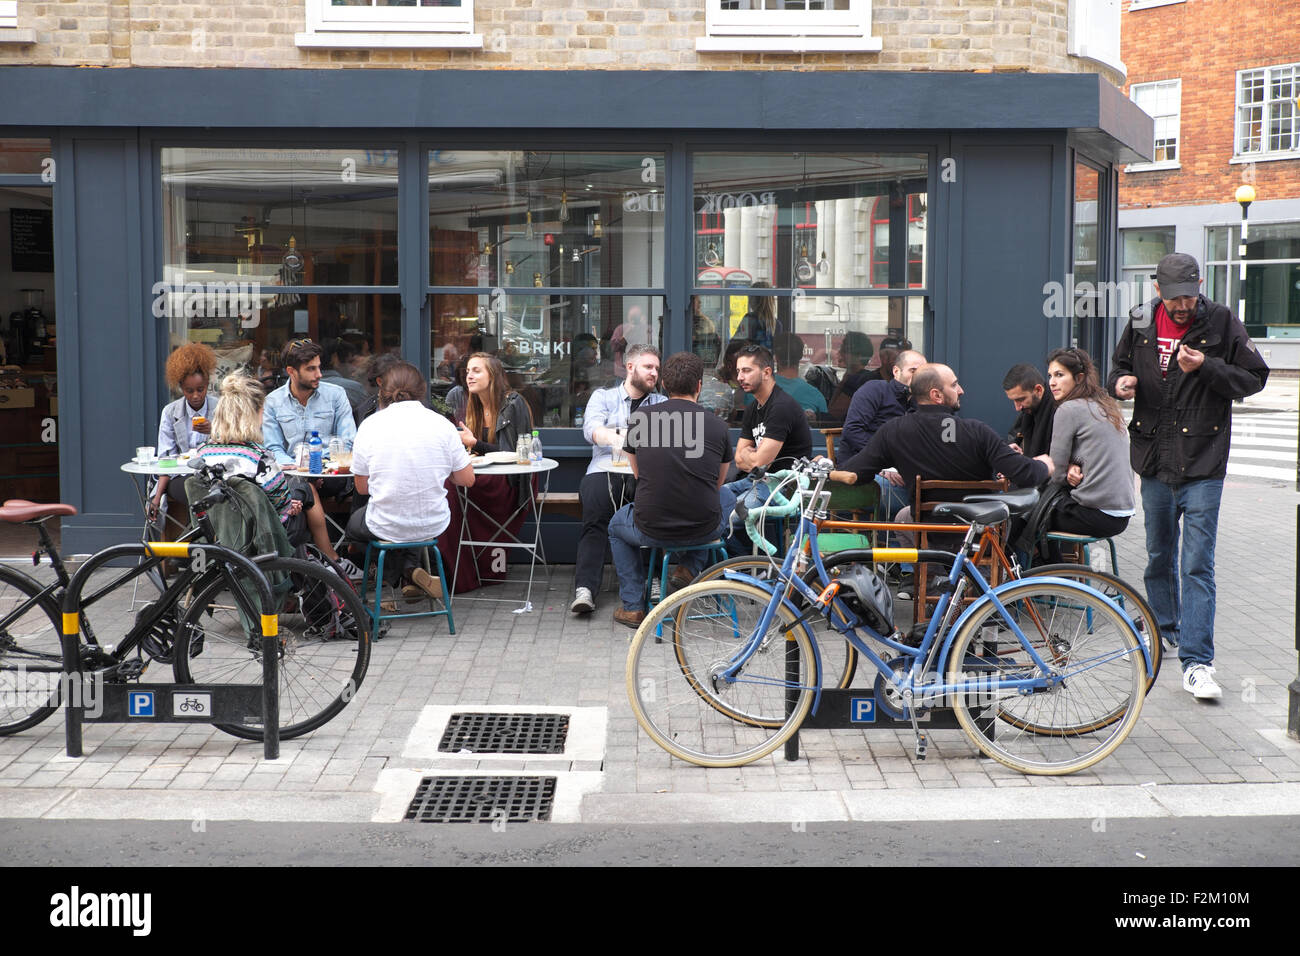 London Finsbury The Briki coffee shop cafe and deli in Exmouth Market London EC1 UK Stock Photo